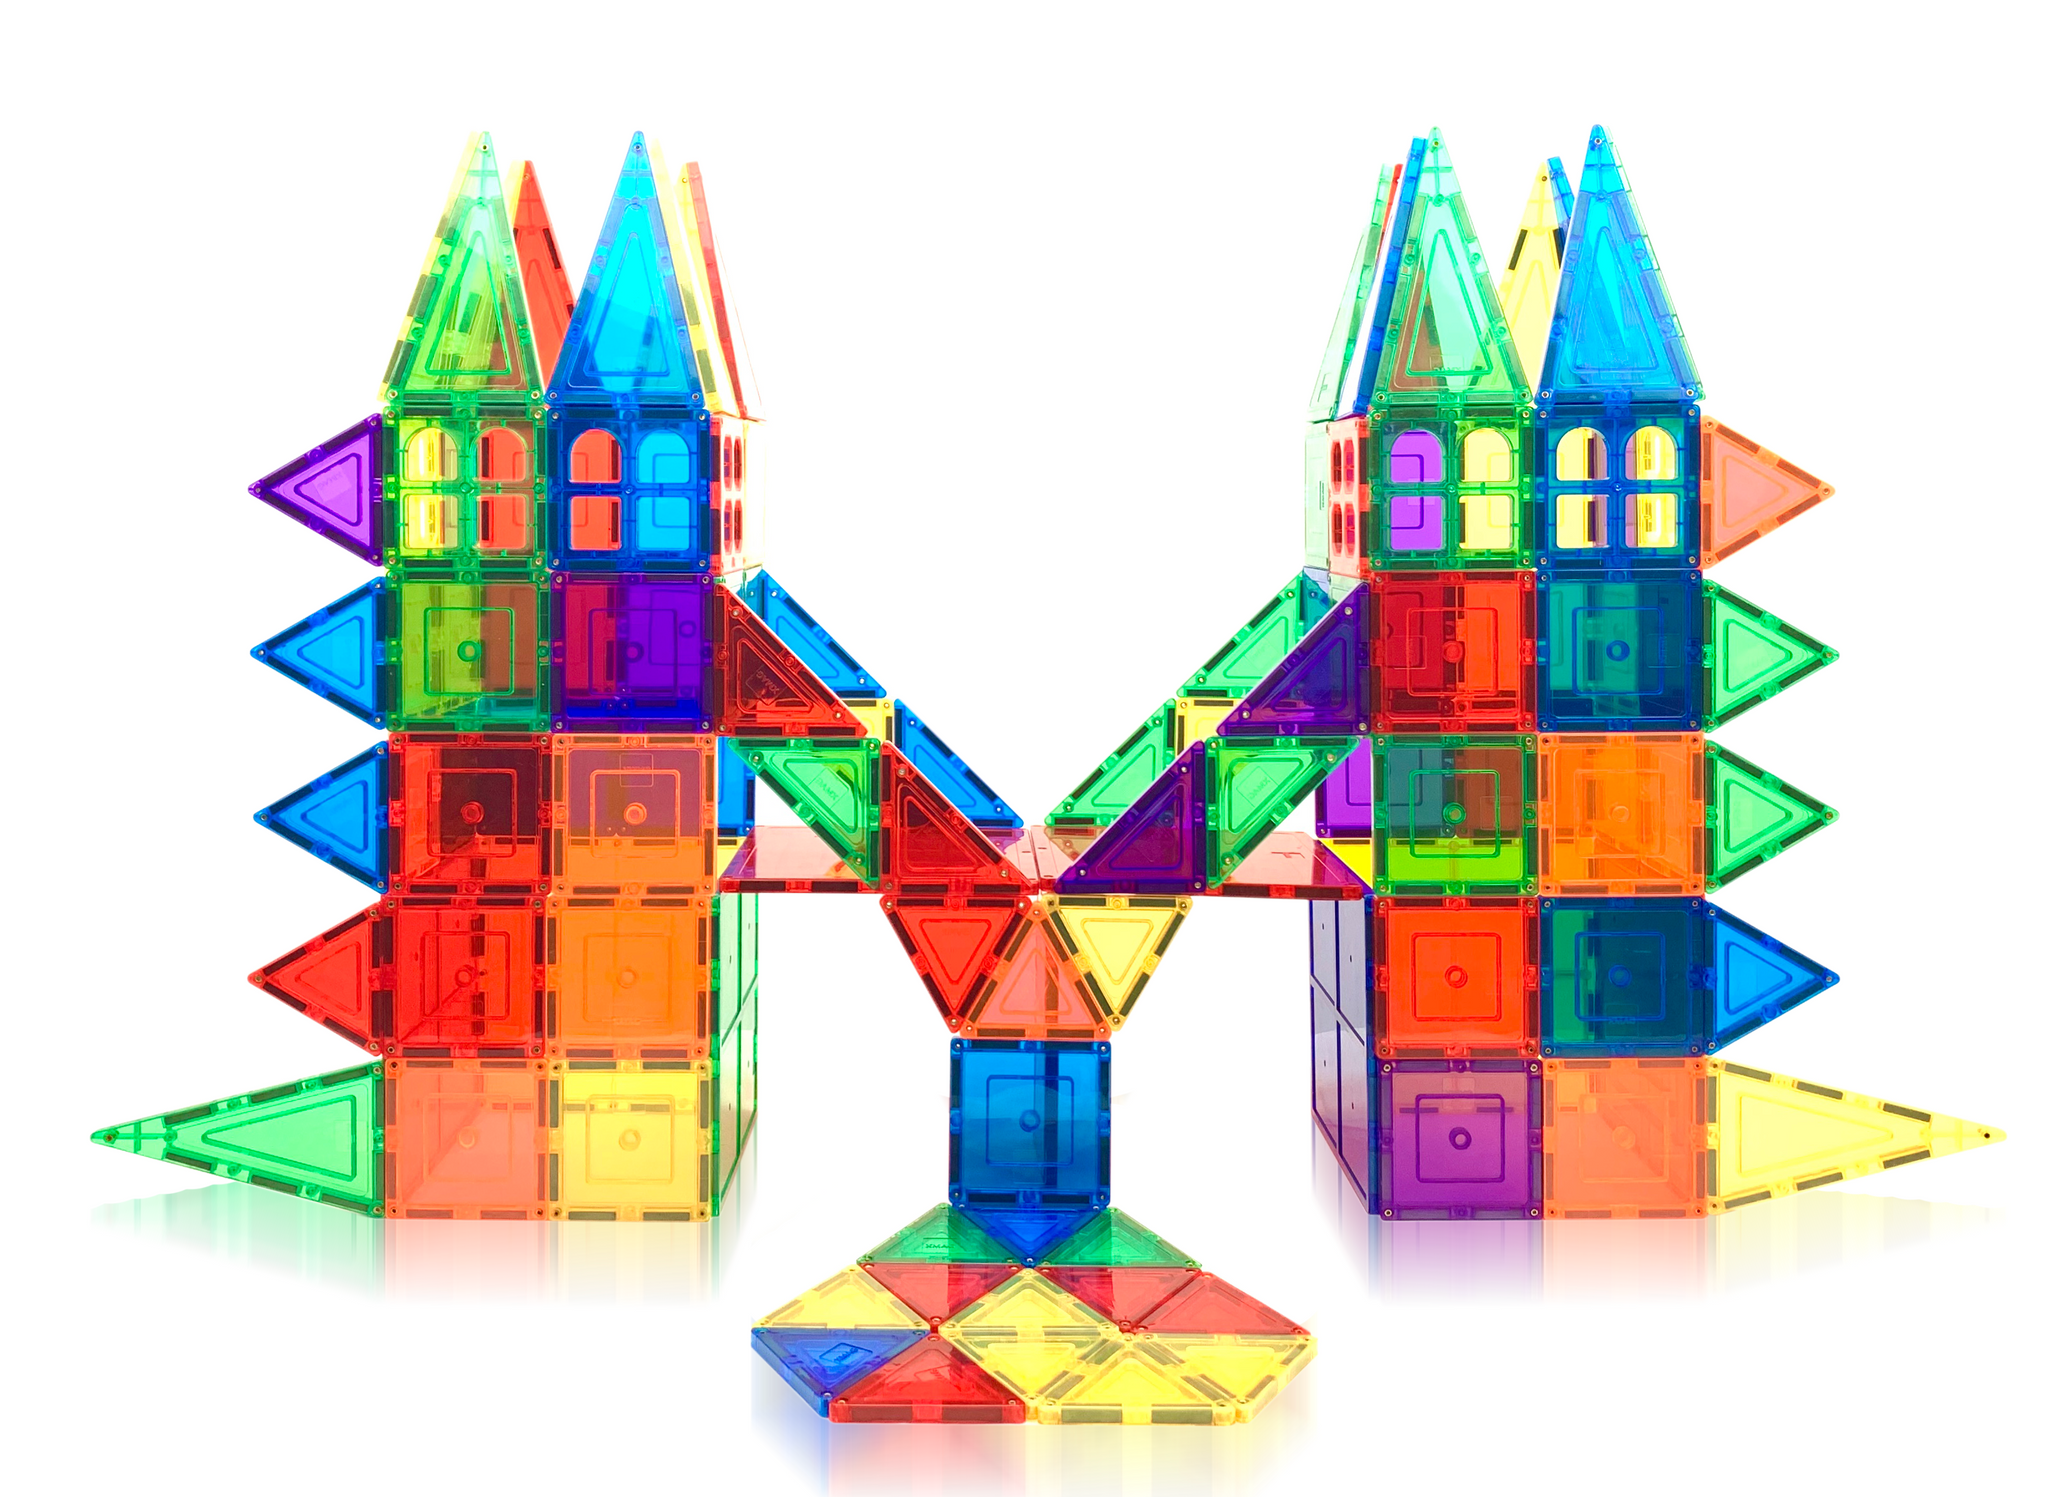 The Best Building Toys, Blocks, and Magnetic Tiles for Budding Engineers